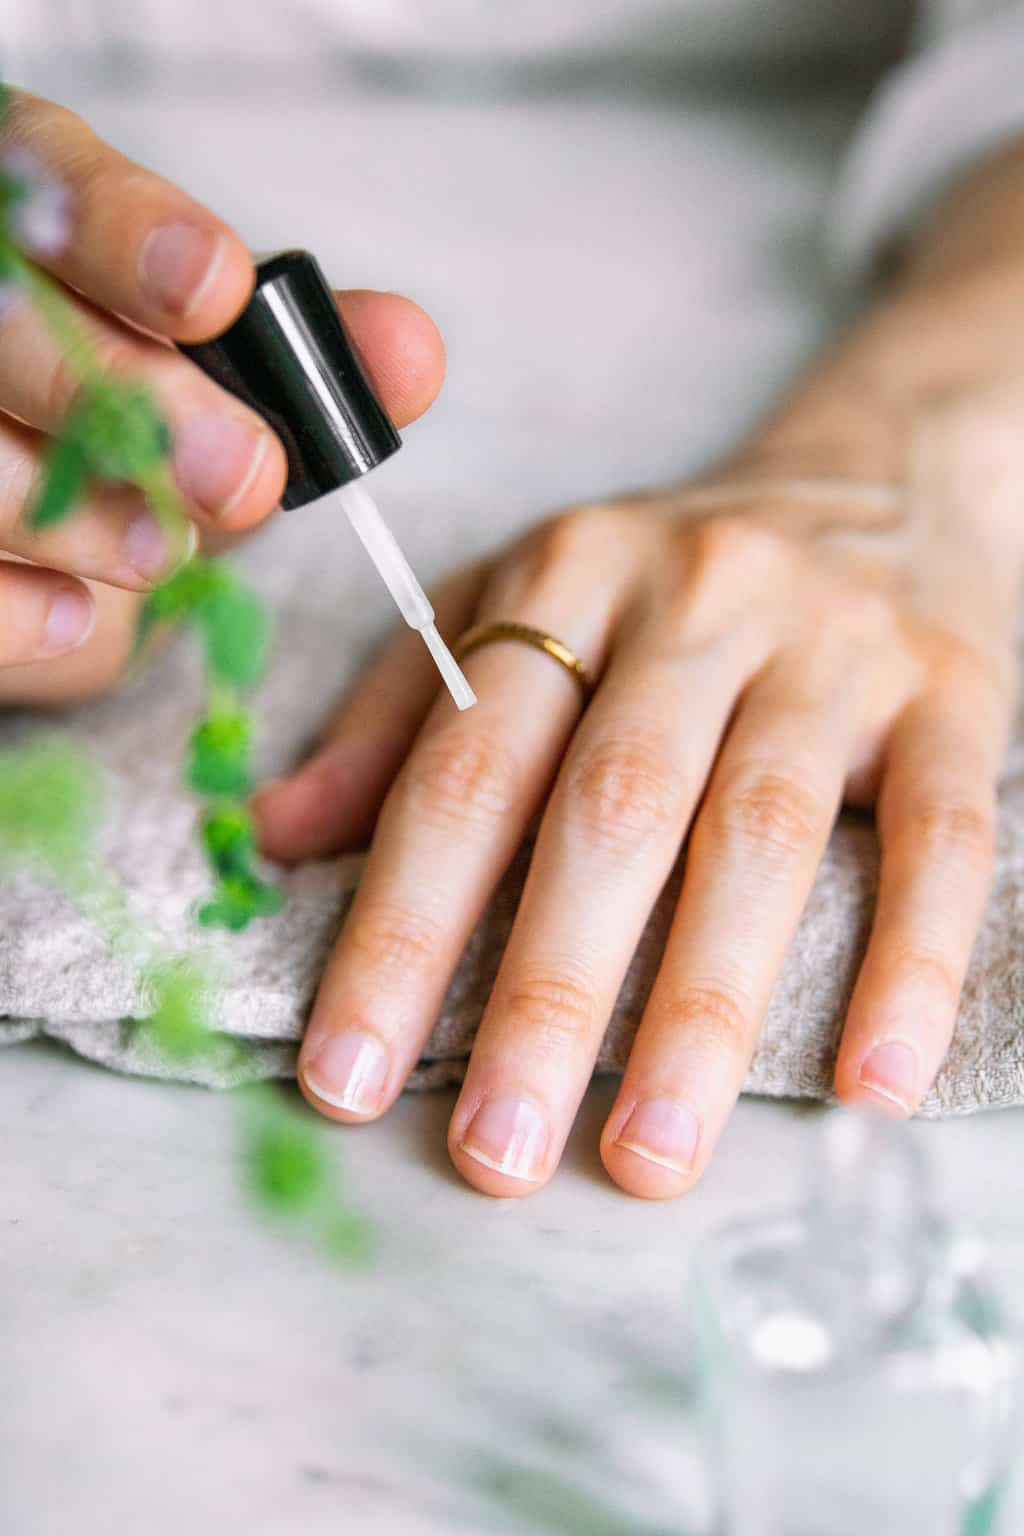 Apply a base coat - step 5 in how to do a french manicure at home 